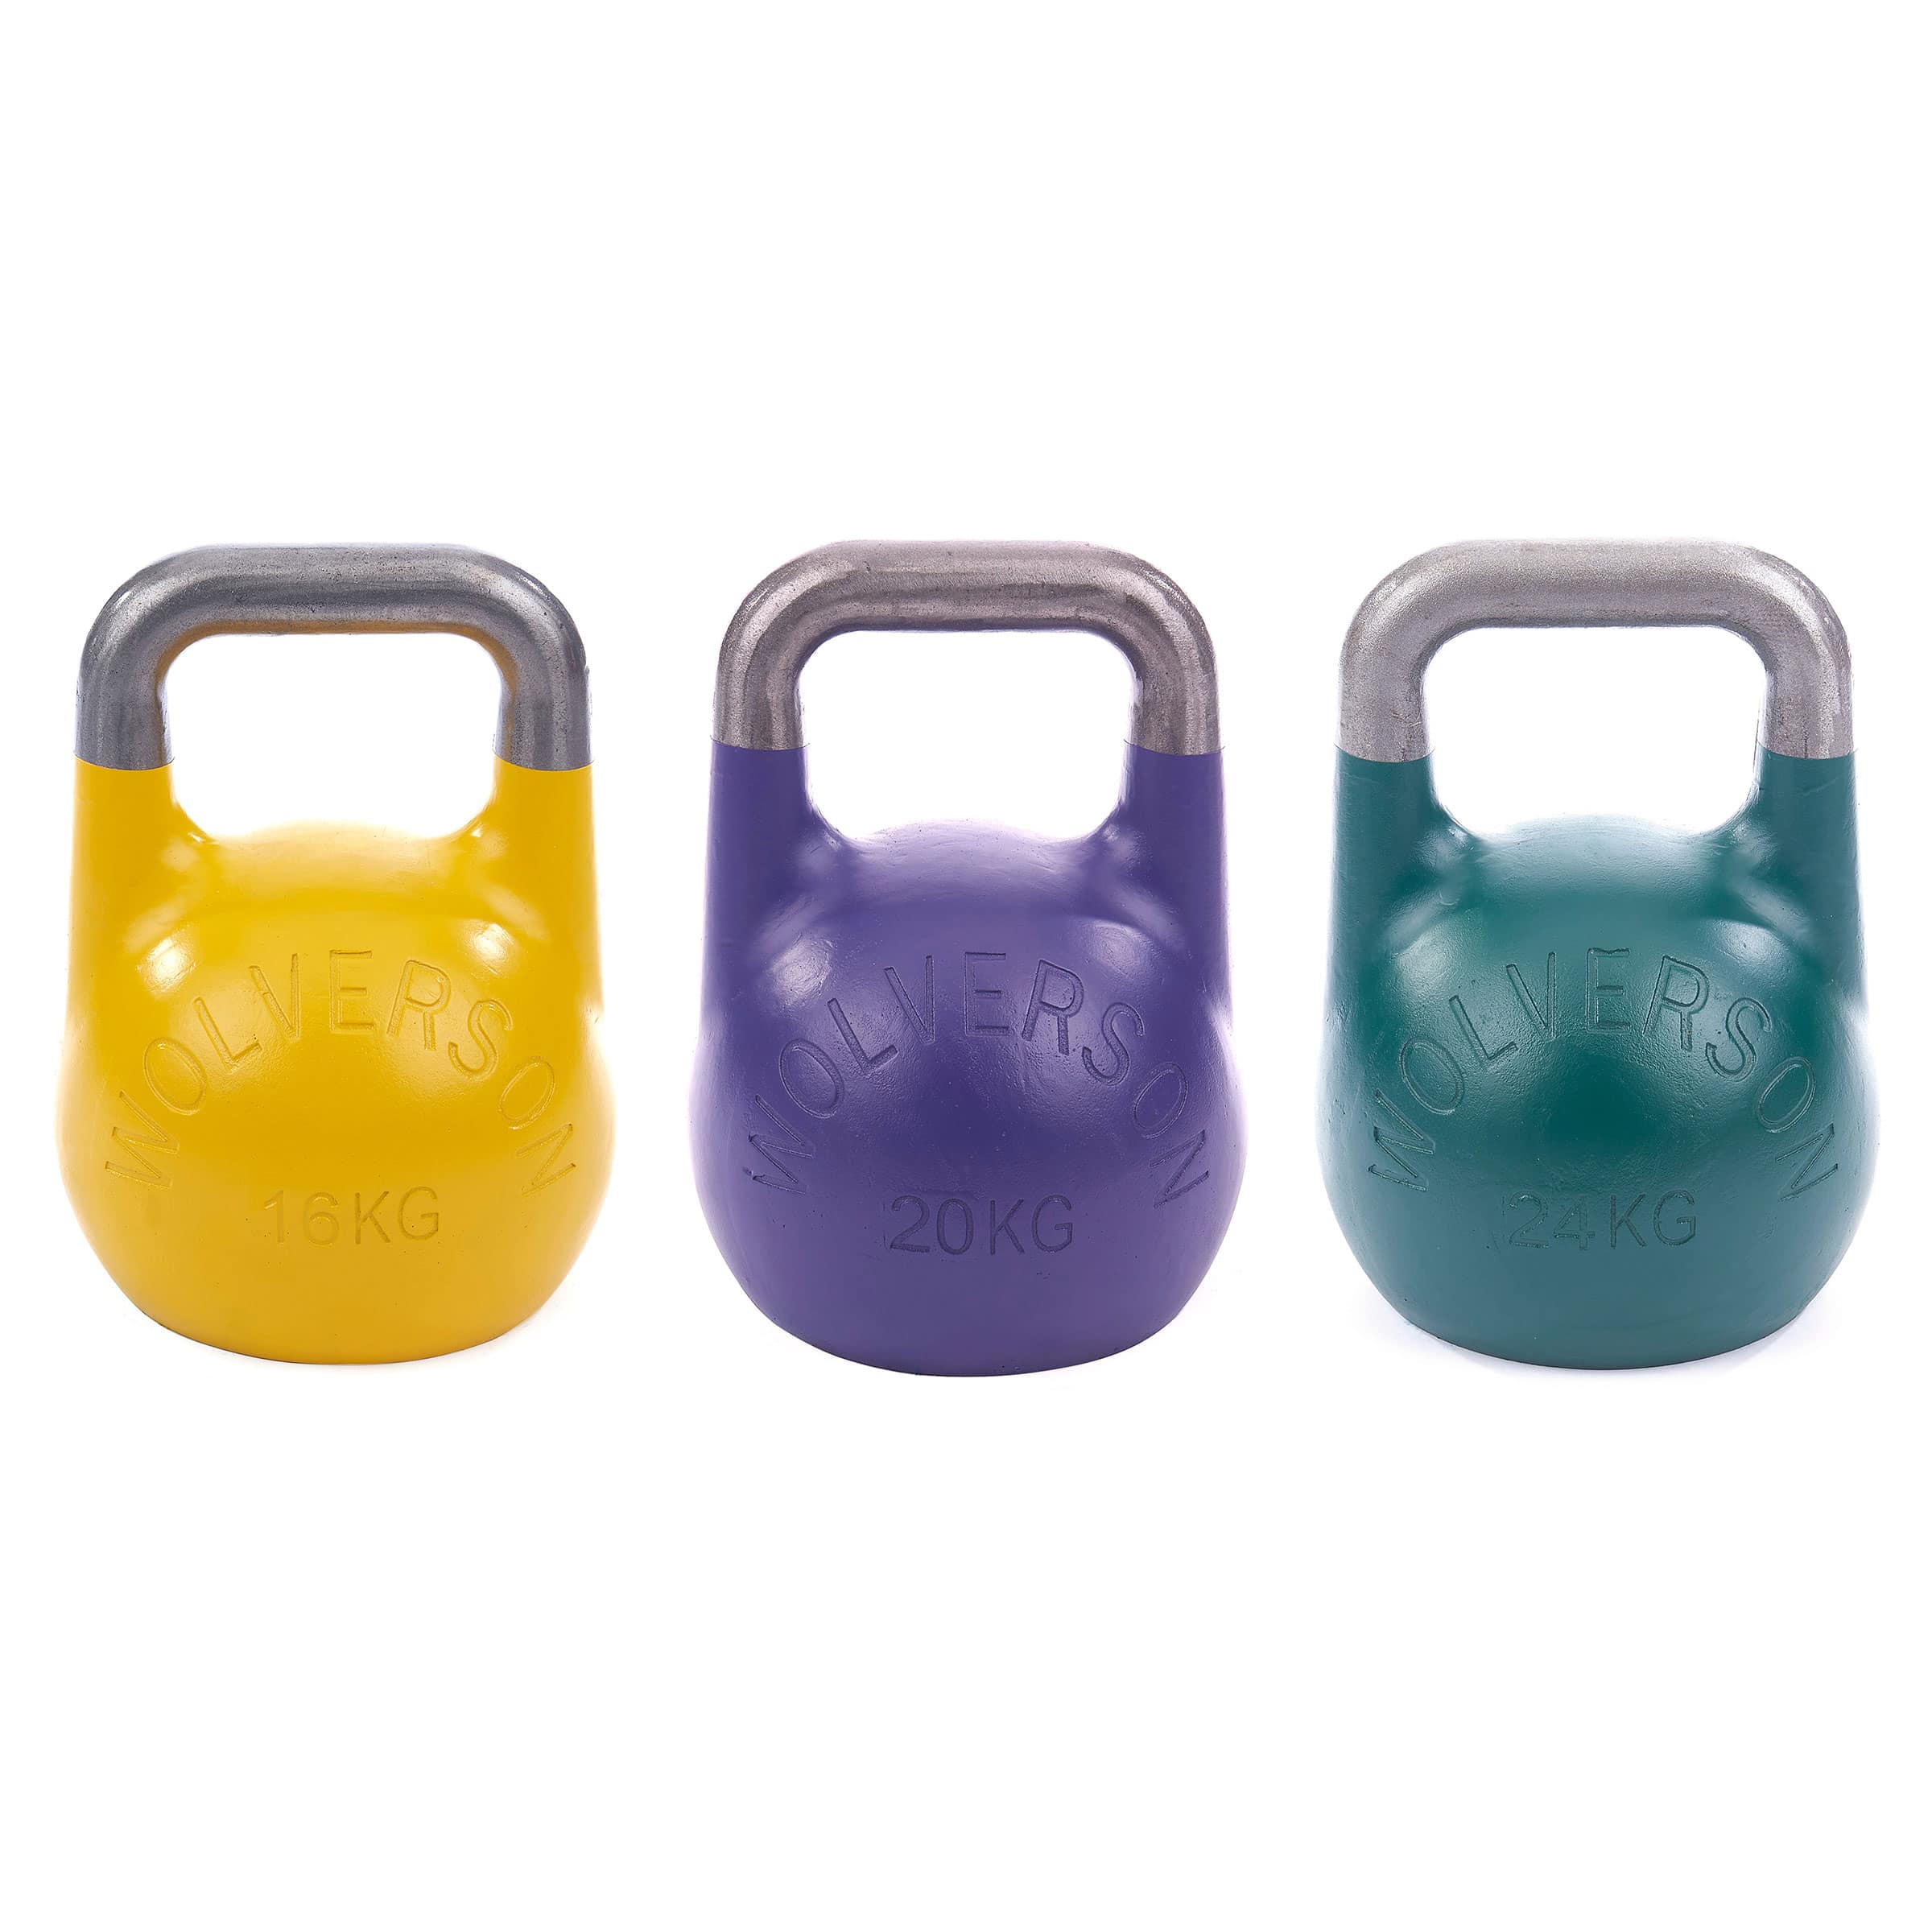 Wolverson Competition Kettlebells Sets - Wolverson Fitness